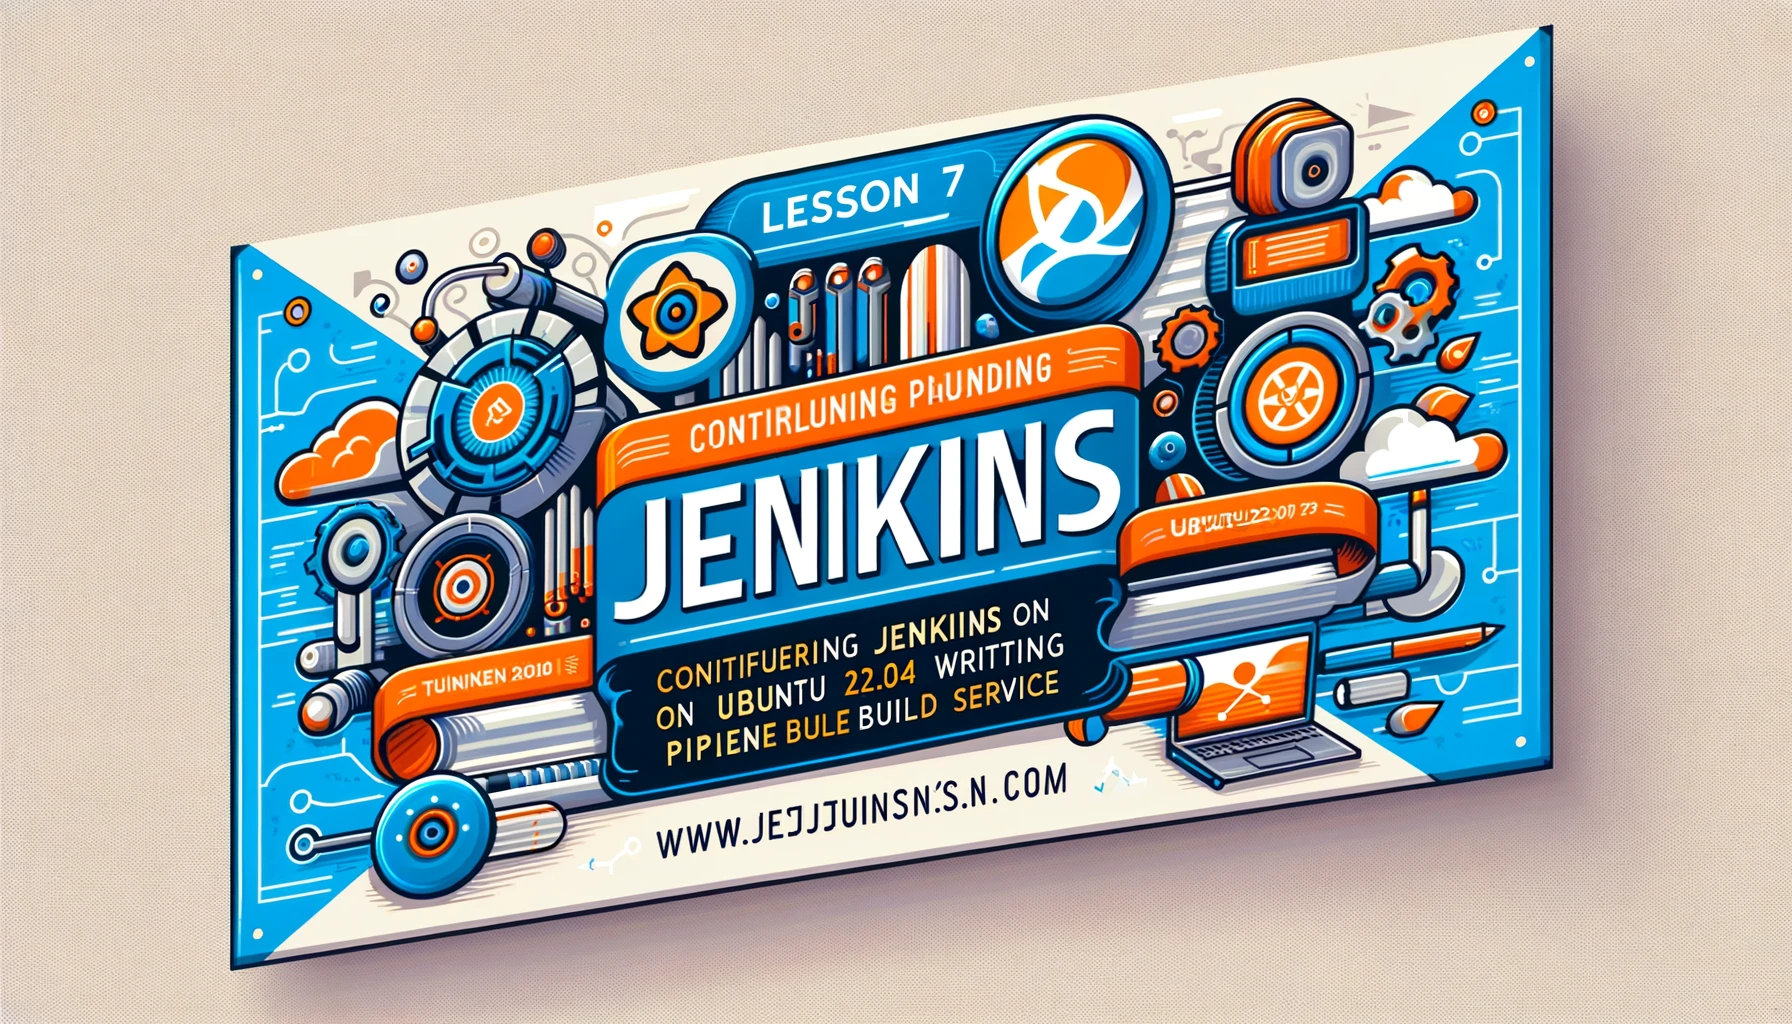 Lesson 6 - Configuring Jenkins on Ubuntu 22.04 and writing Pipeline Build Service